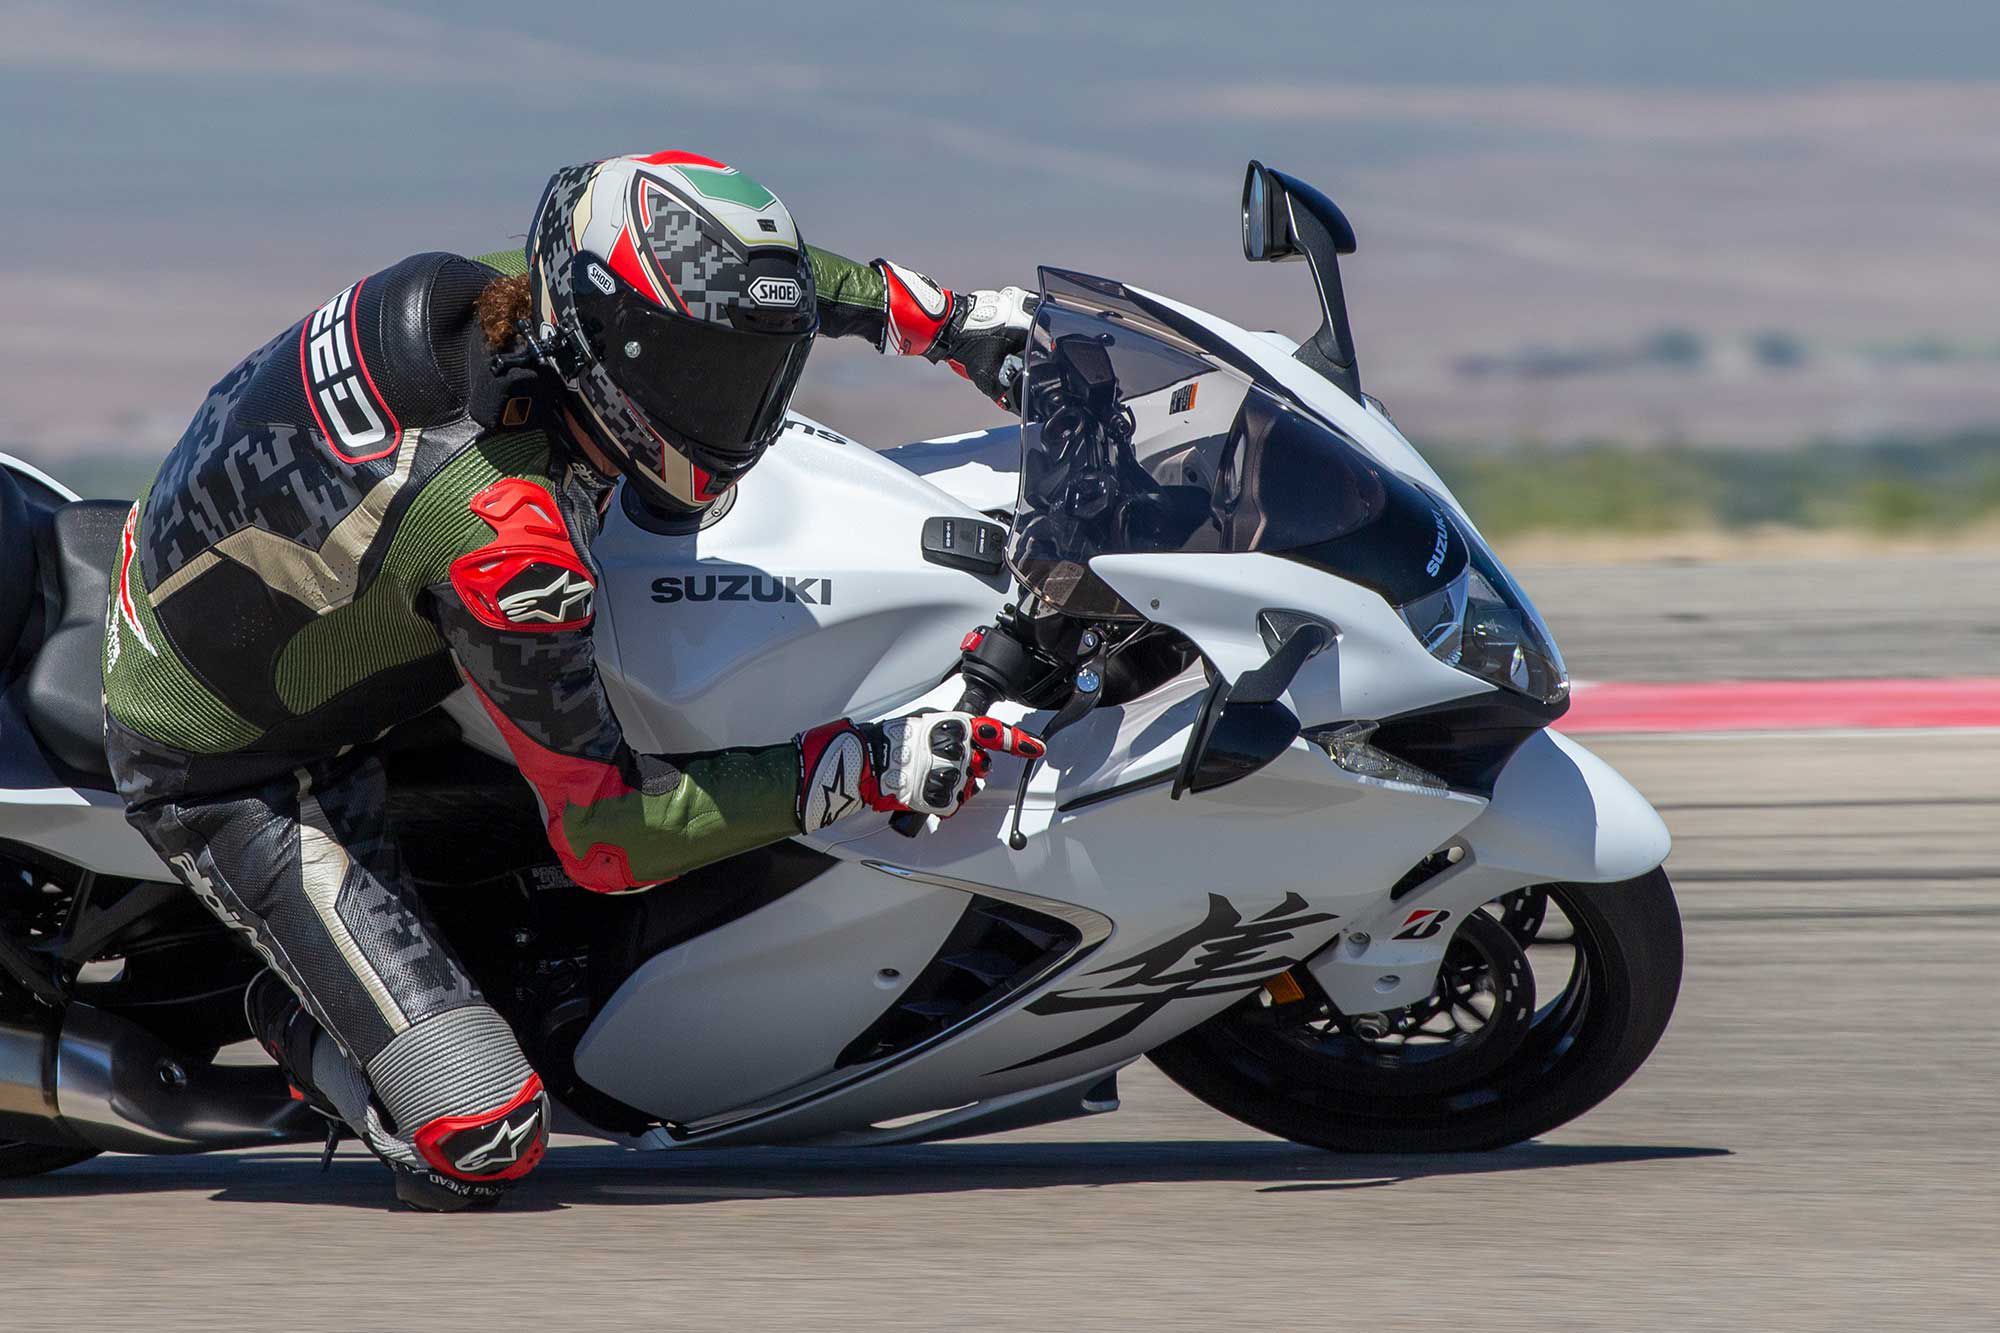 In Part 2 of our Suzuki Hayabusa review series we ride it around the 3.048-mile perimeter course at the Utah Motorsport Campus.